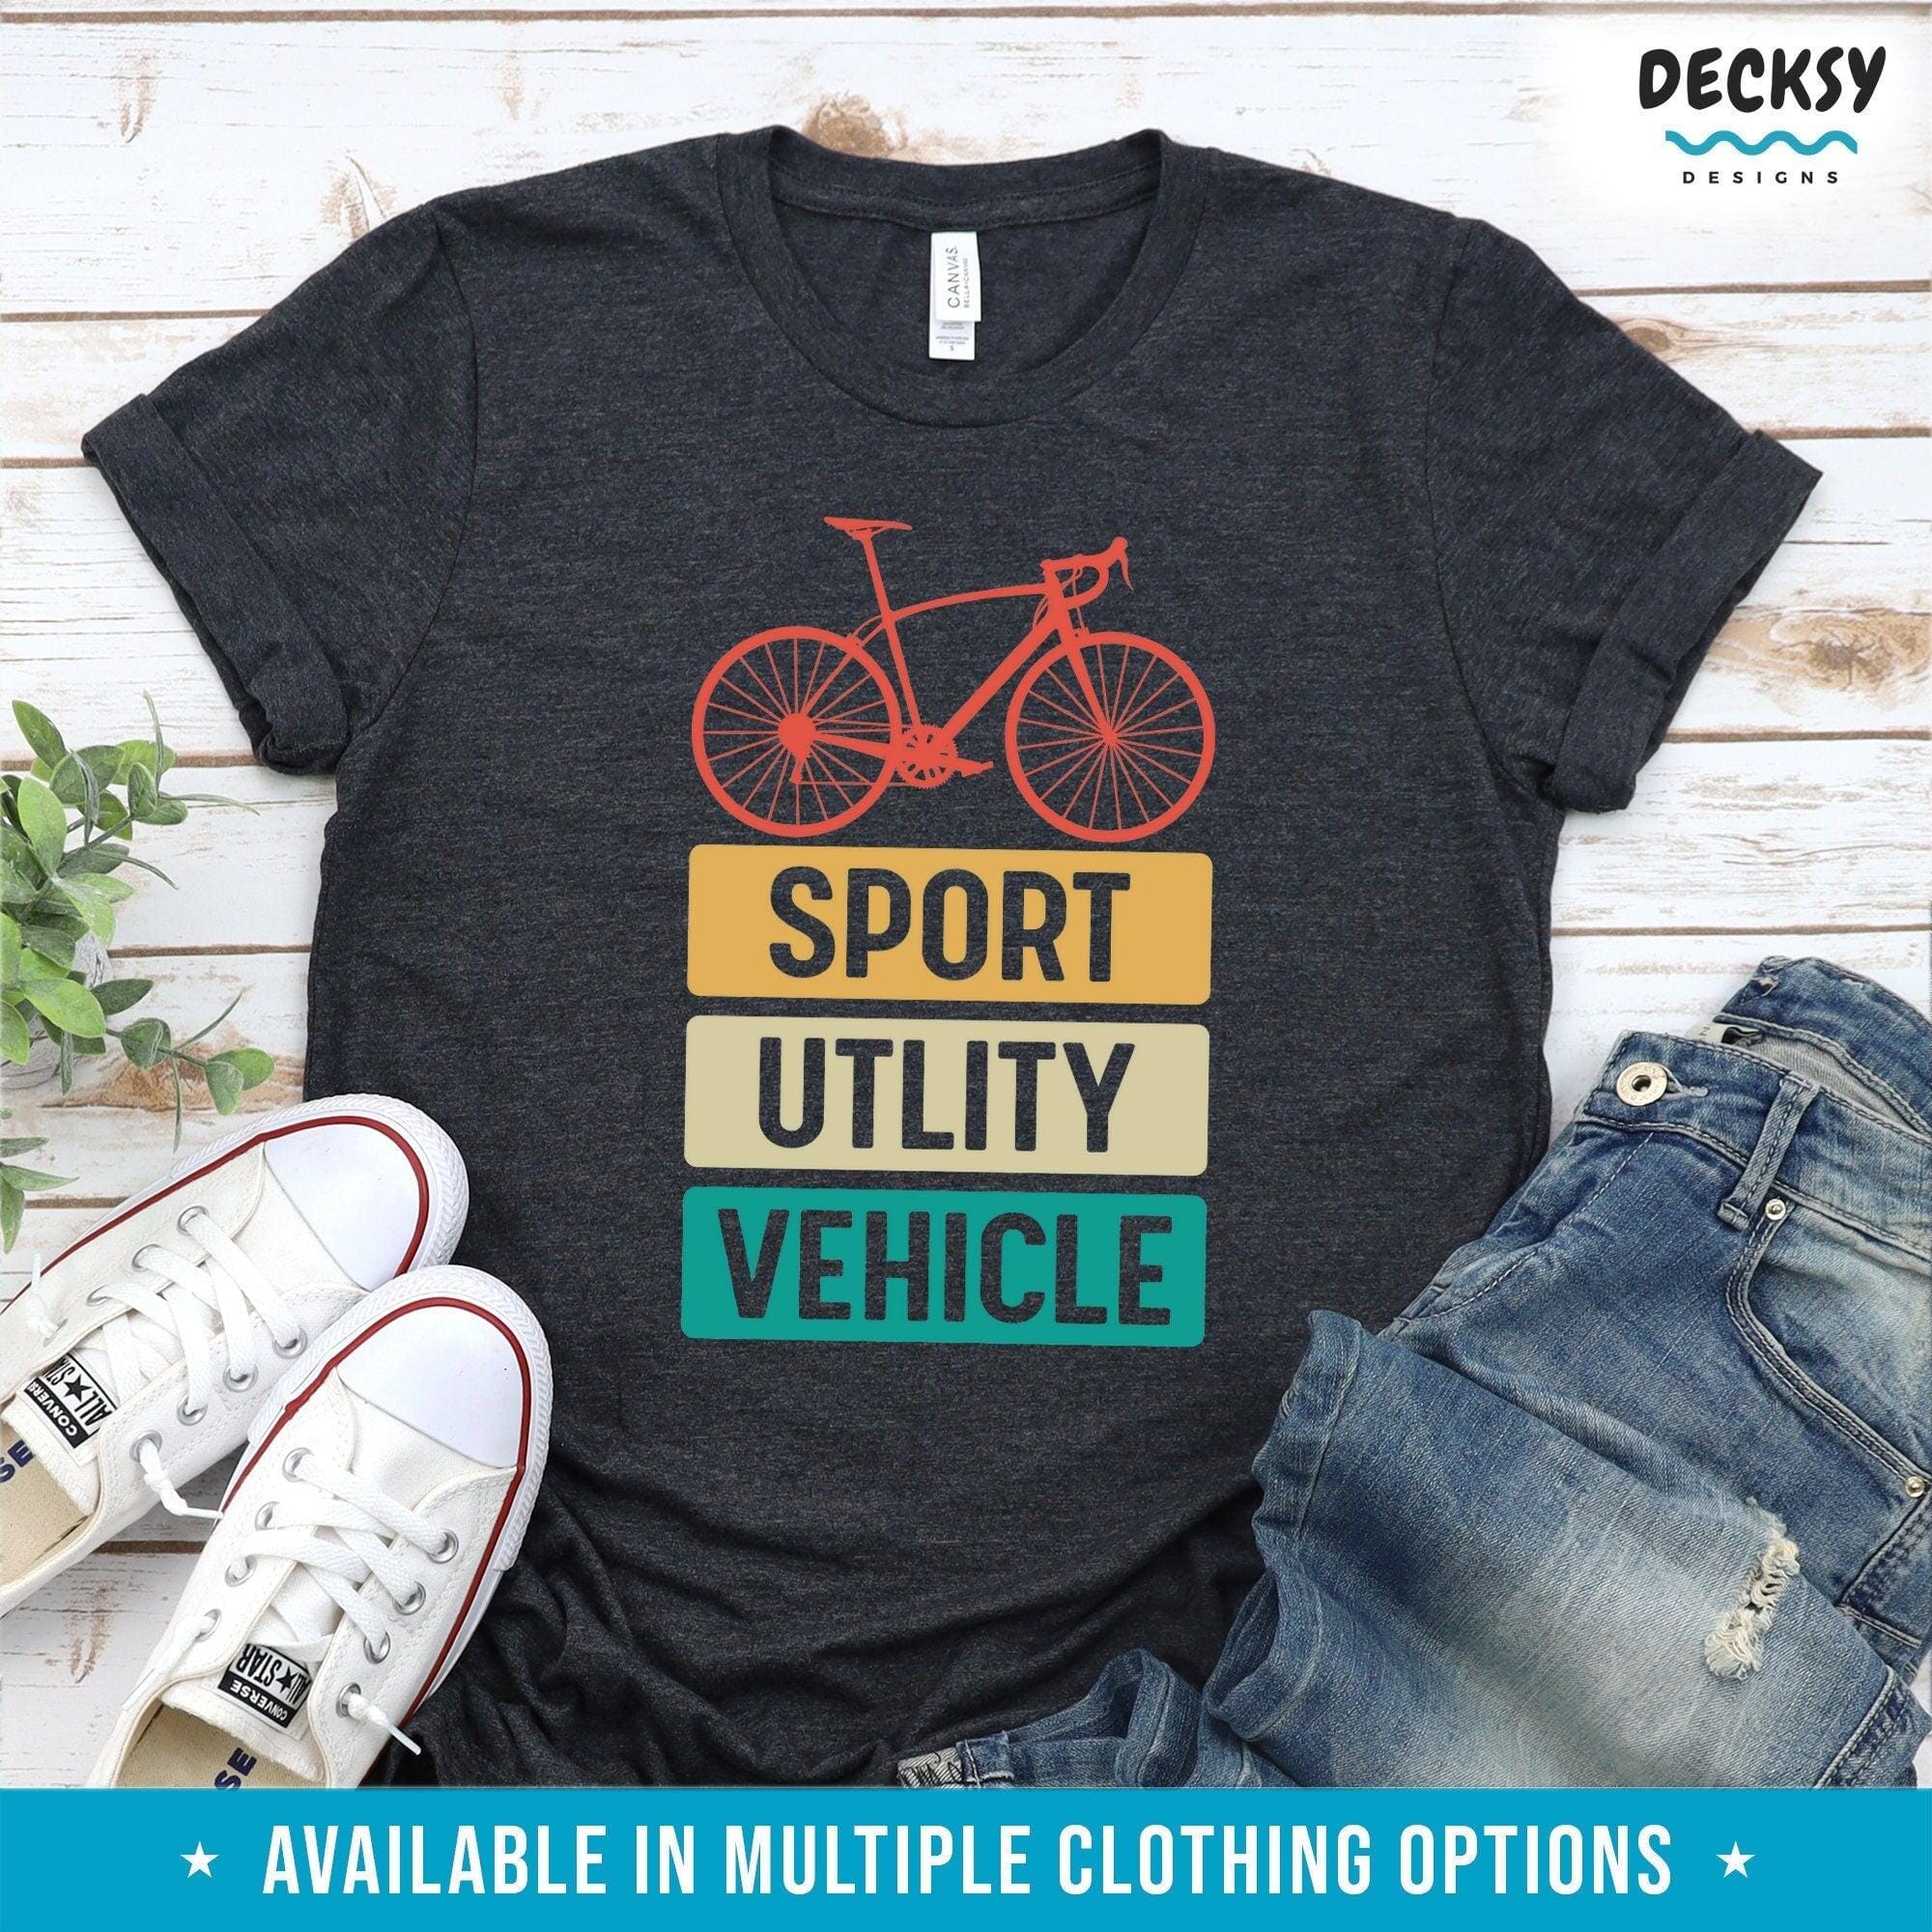 Cycling T-shirt, Bicycle Lover Gift-Clothing:Gender-Neutral Adult Clothing:Tops & Tees:T-shirts:Graphic Tees-DecksyDesigns